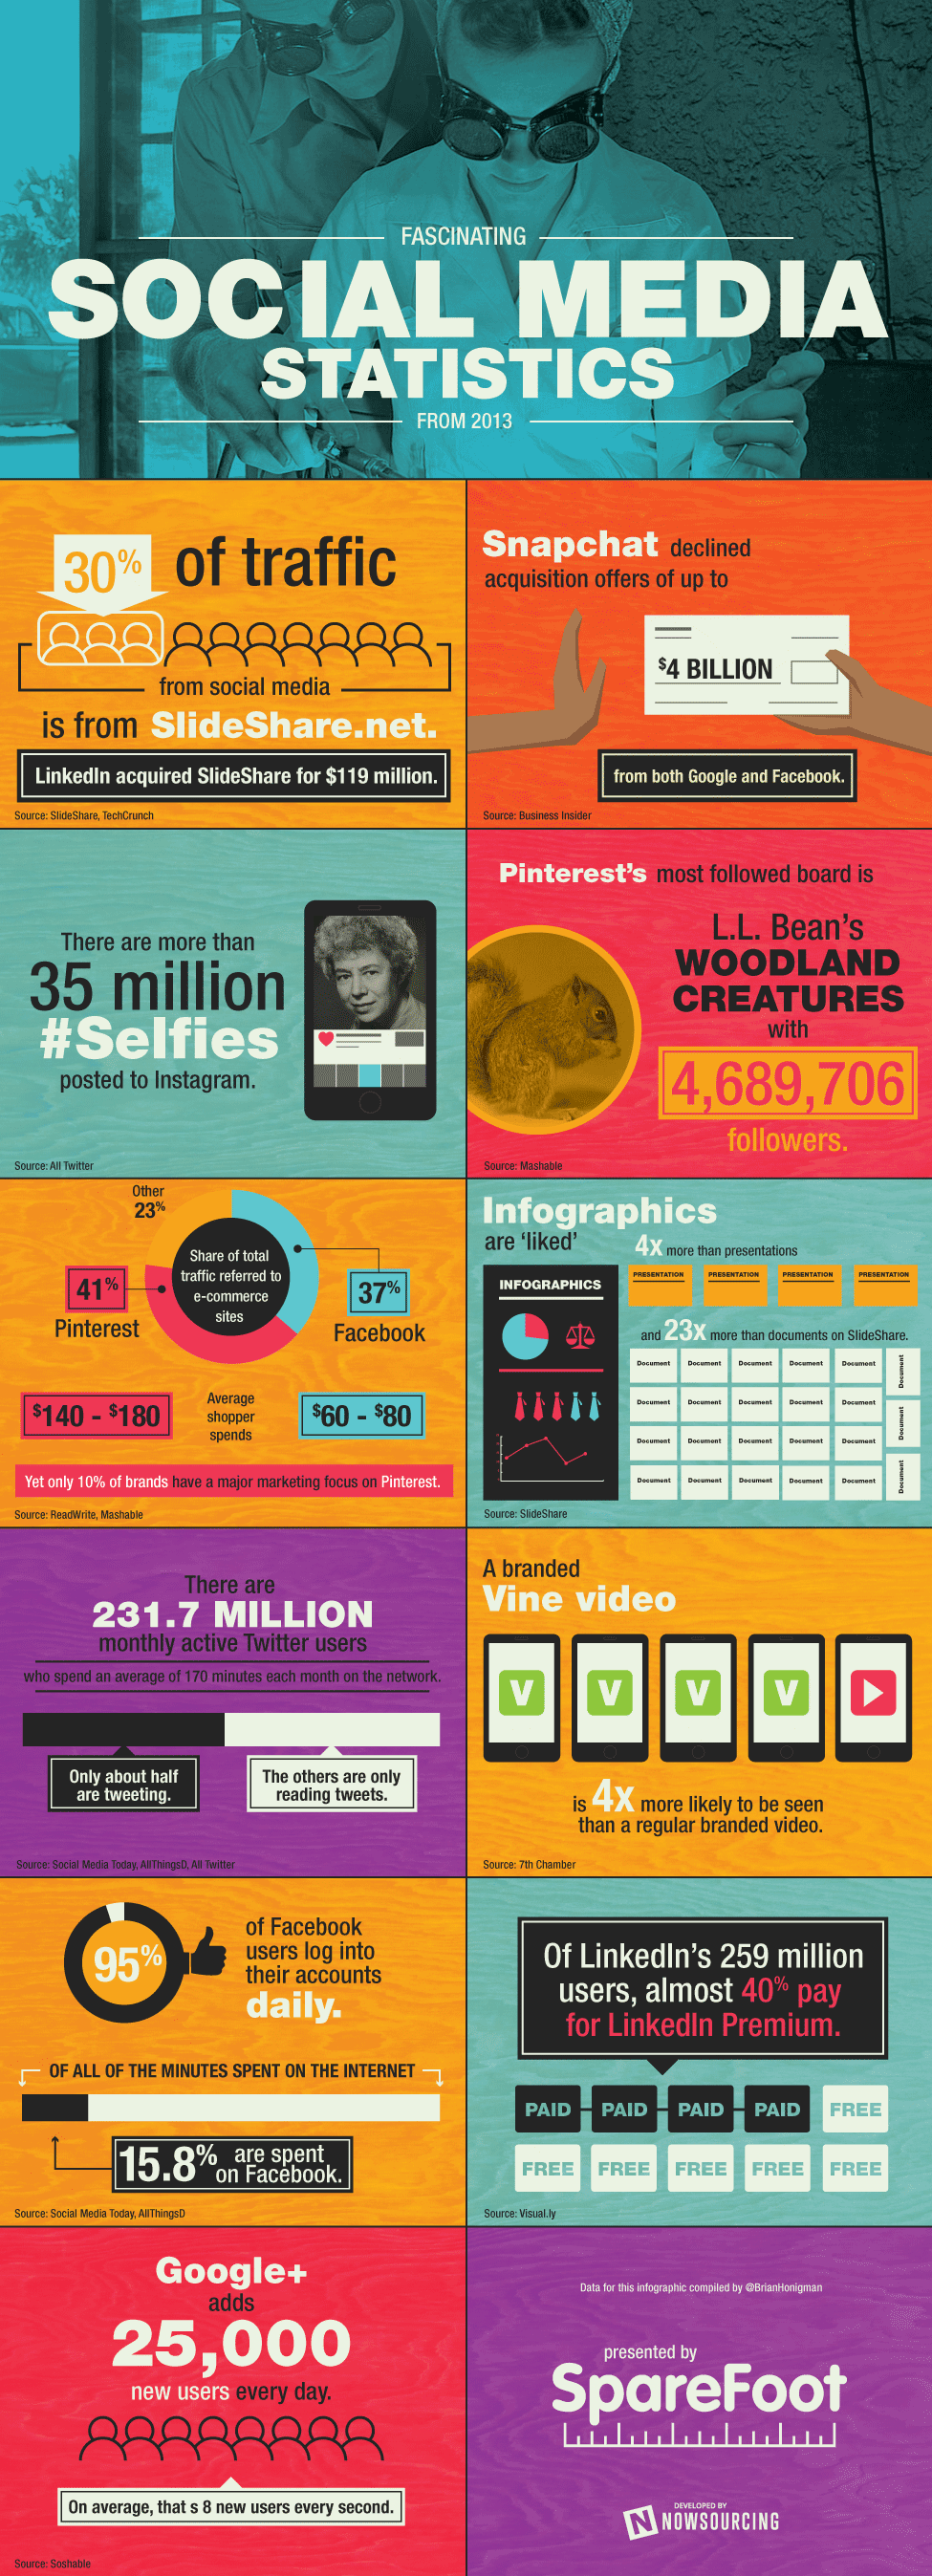 13 Fascinating Social Media Statistics From 2013 [INFOGRAPHIC]